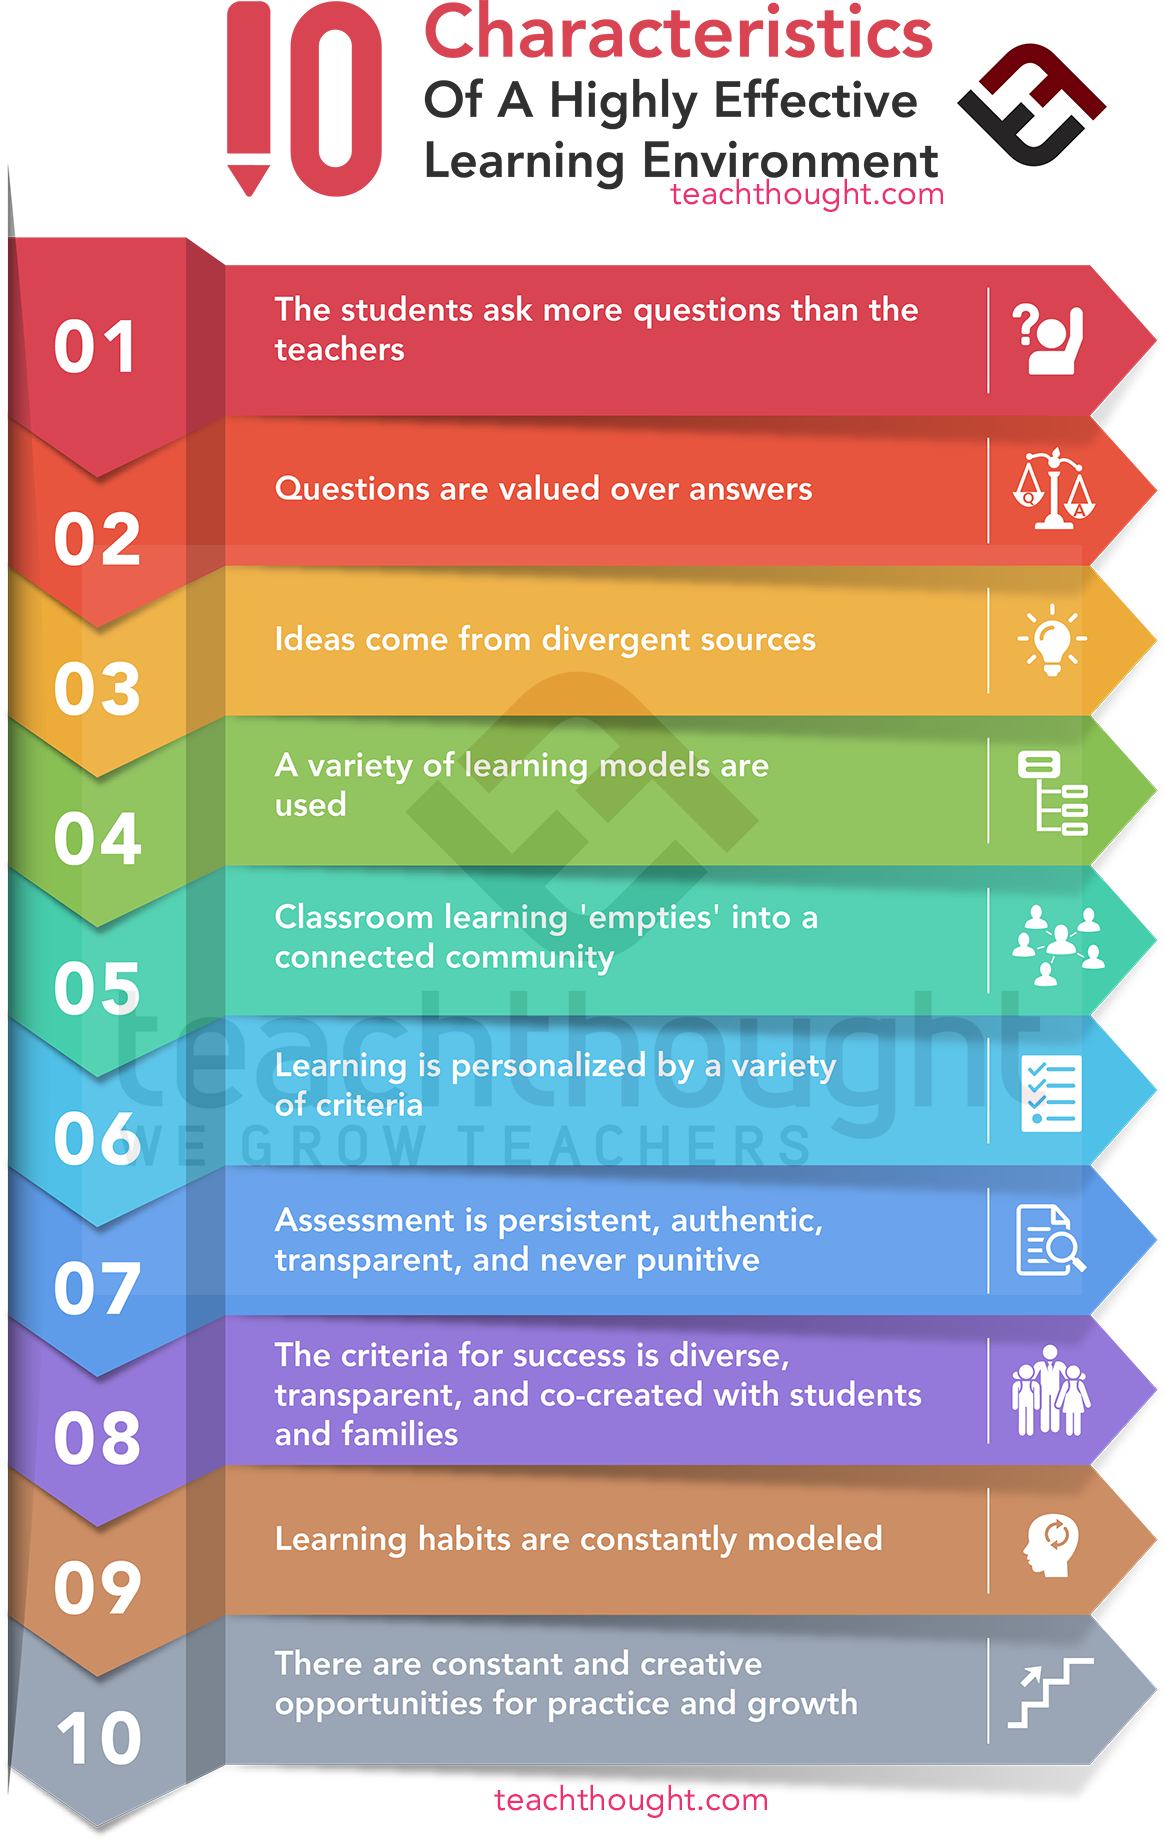 10 Characteristics Of A Highly Effective Learning Environment - 